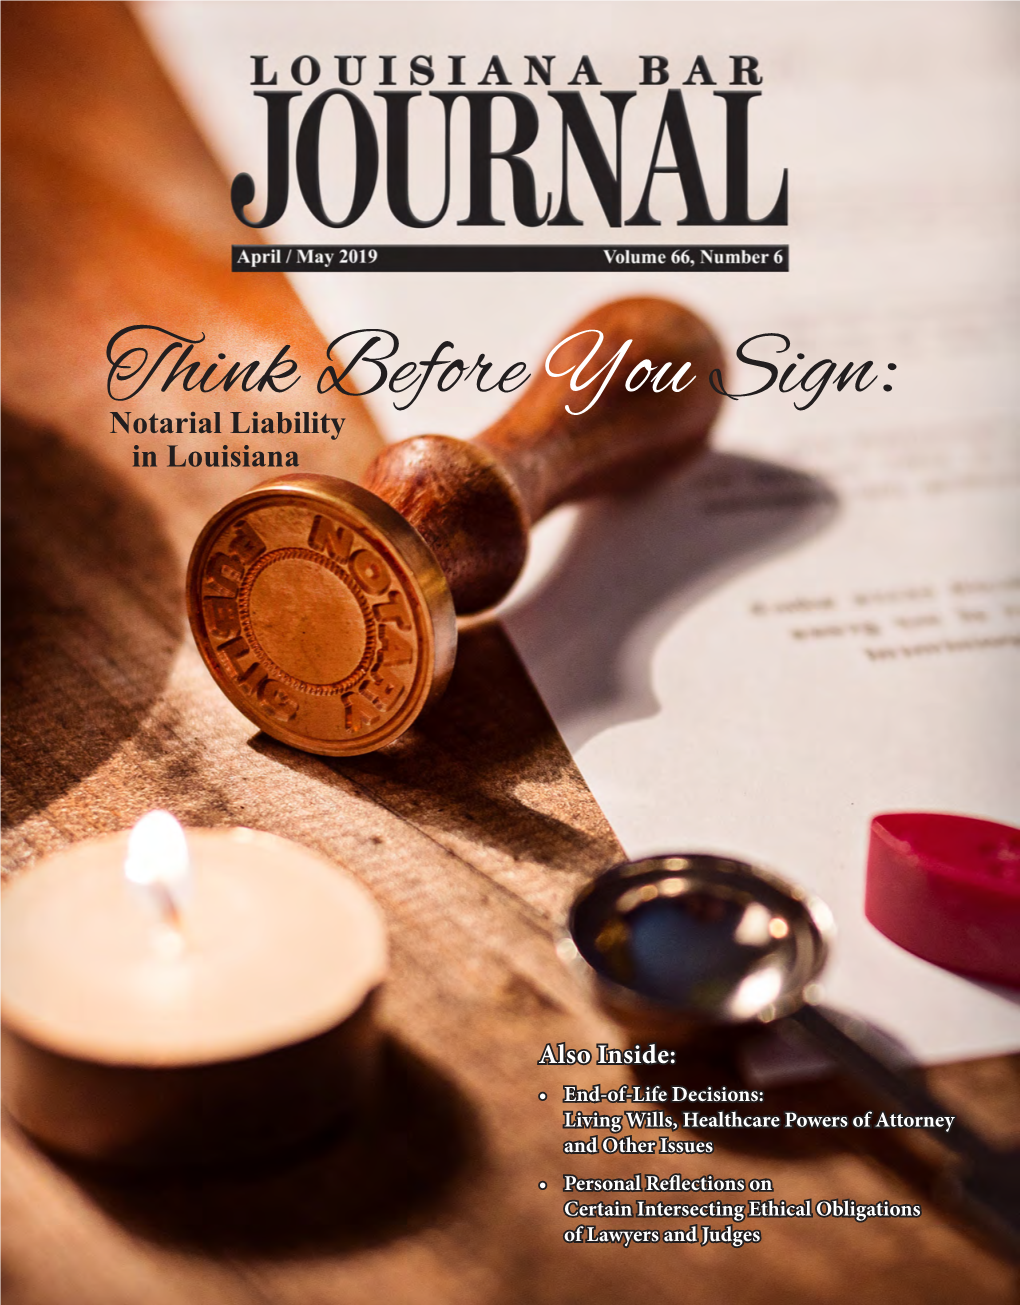 Think Before You Sign: Notarial Liability in Louisiana